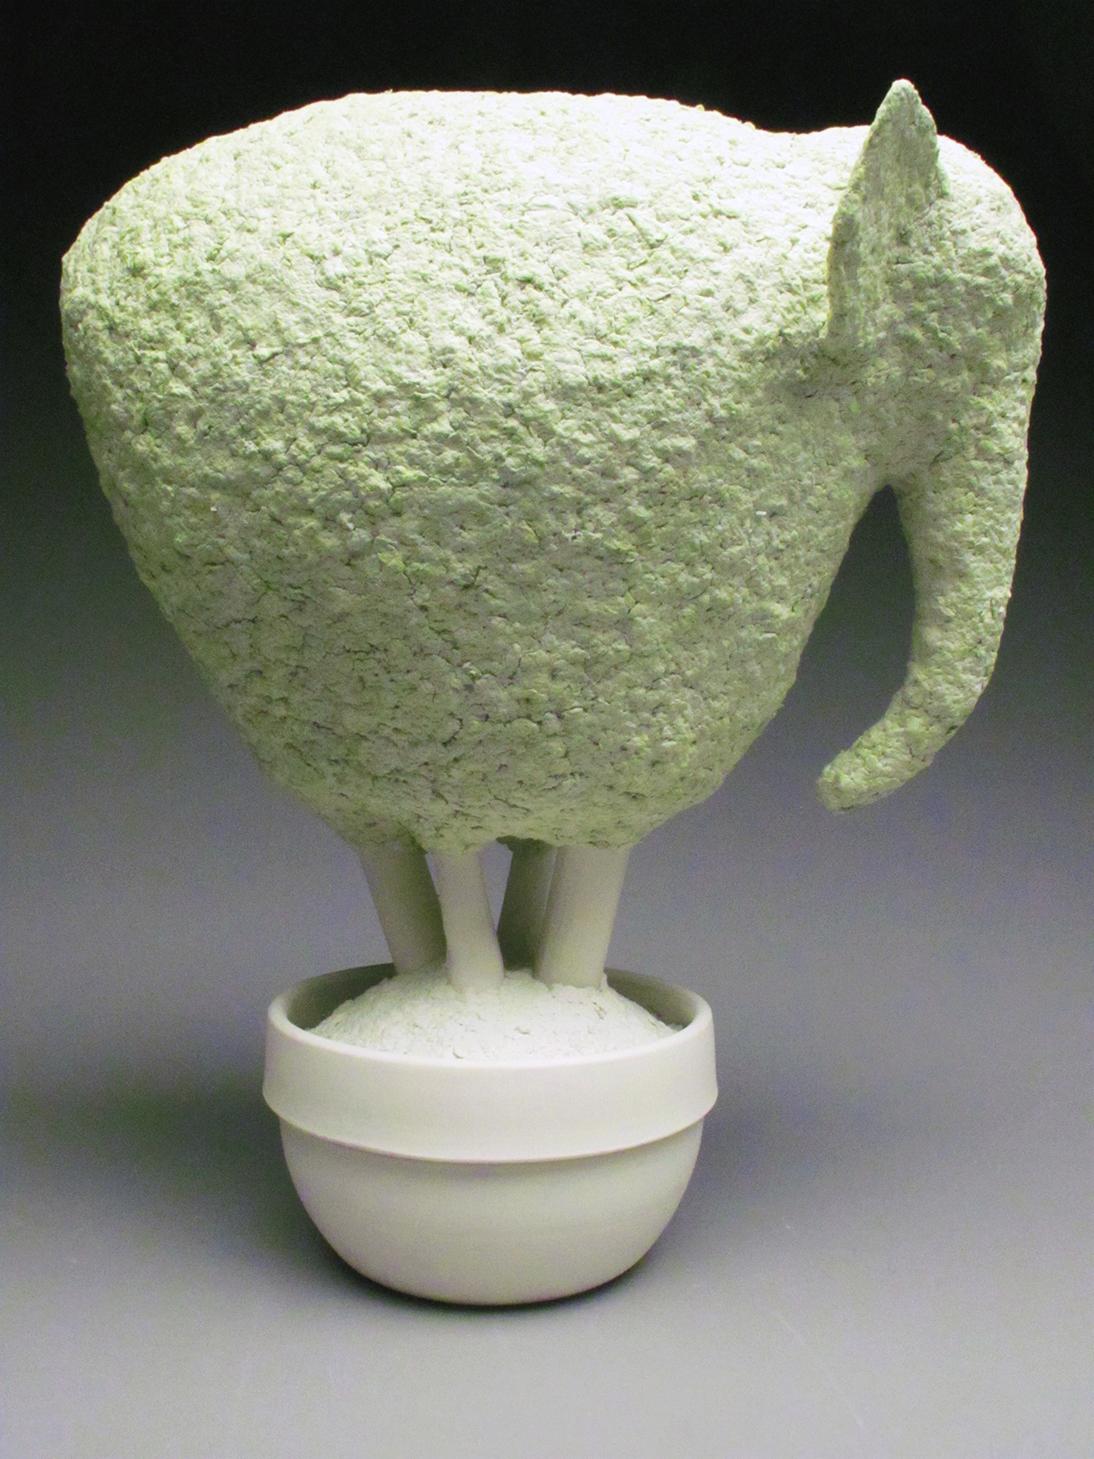 Paper Mache and Porcelain "Elephant Topiary" by Bethany Krull